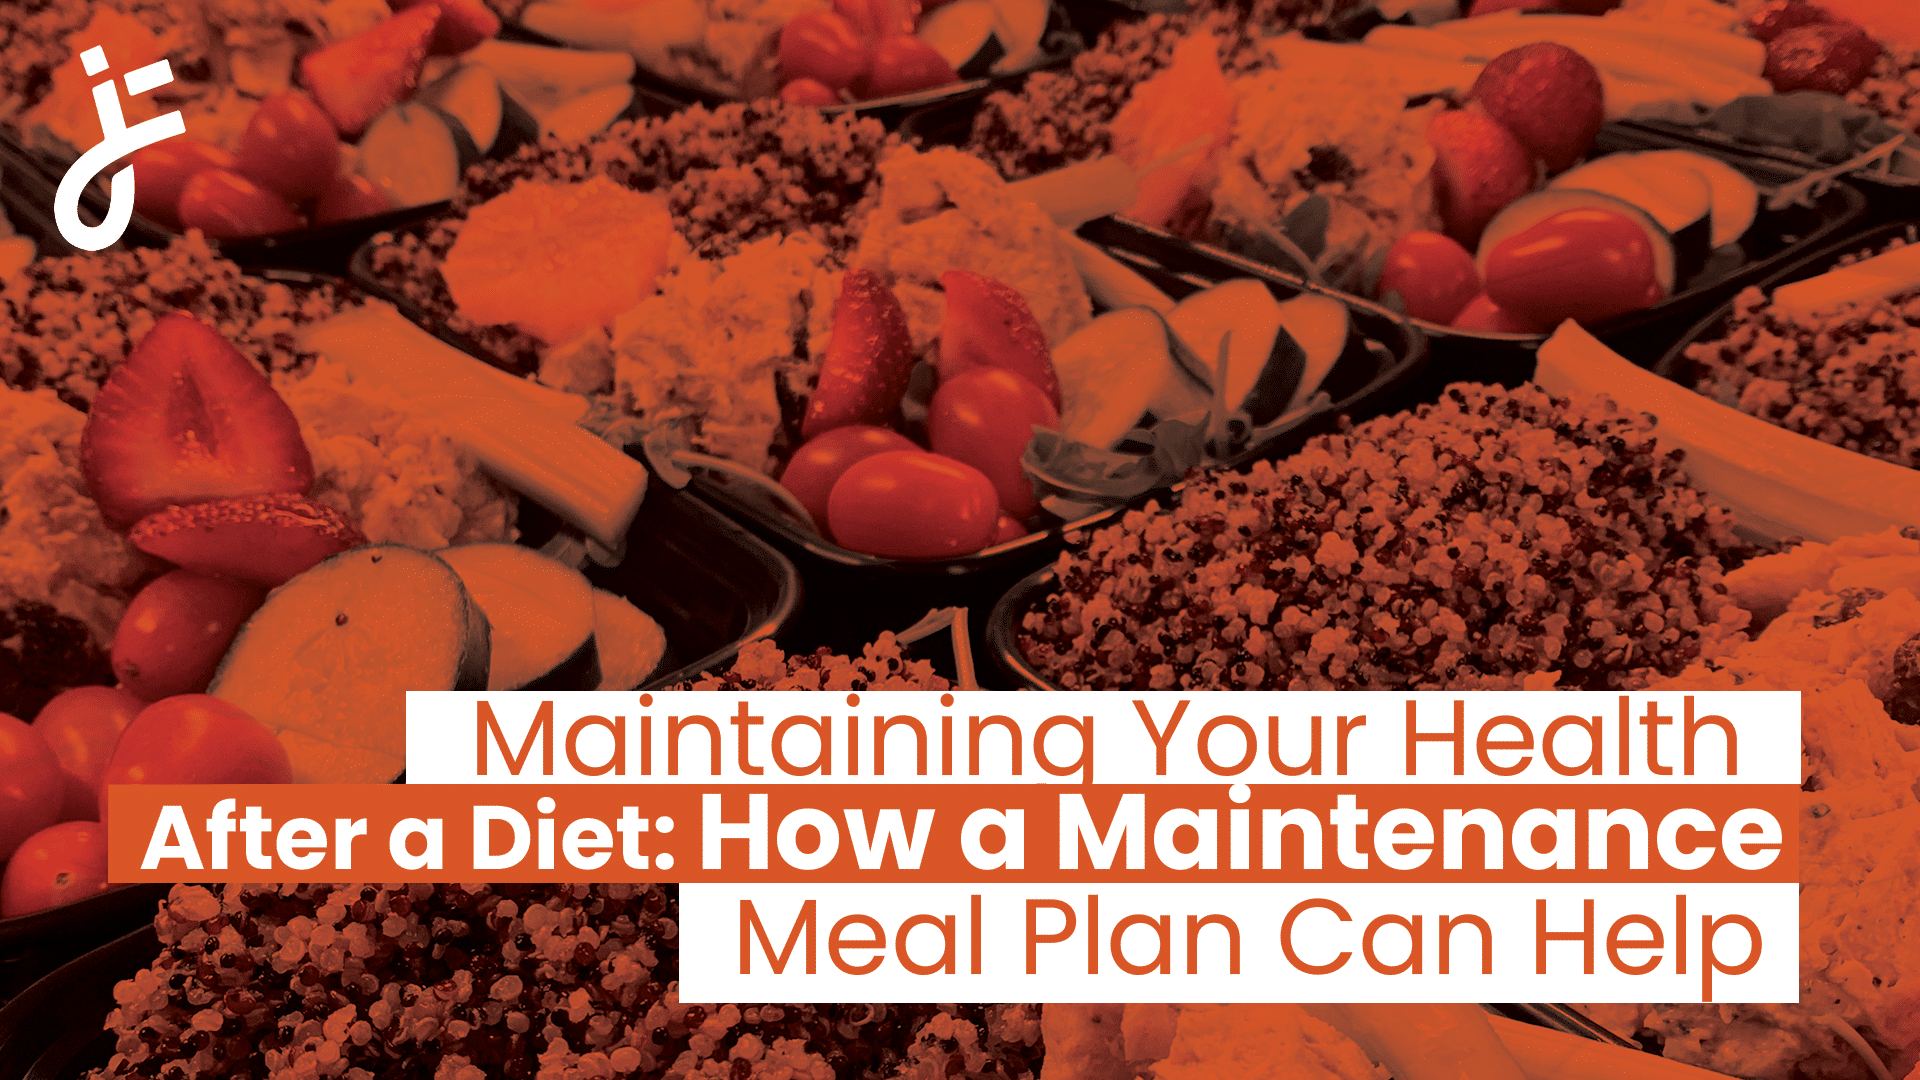 Maintaining Your Health After a Diet: How a Maintenance Meal Plan Can Help